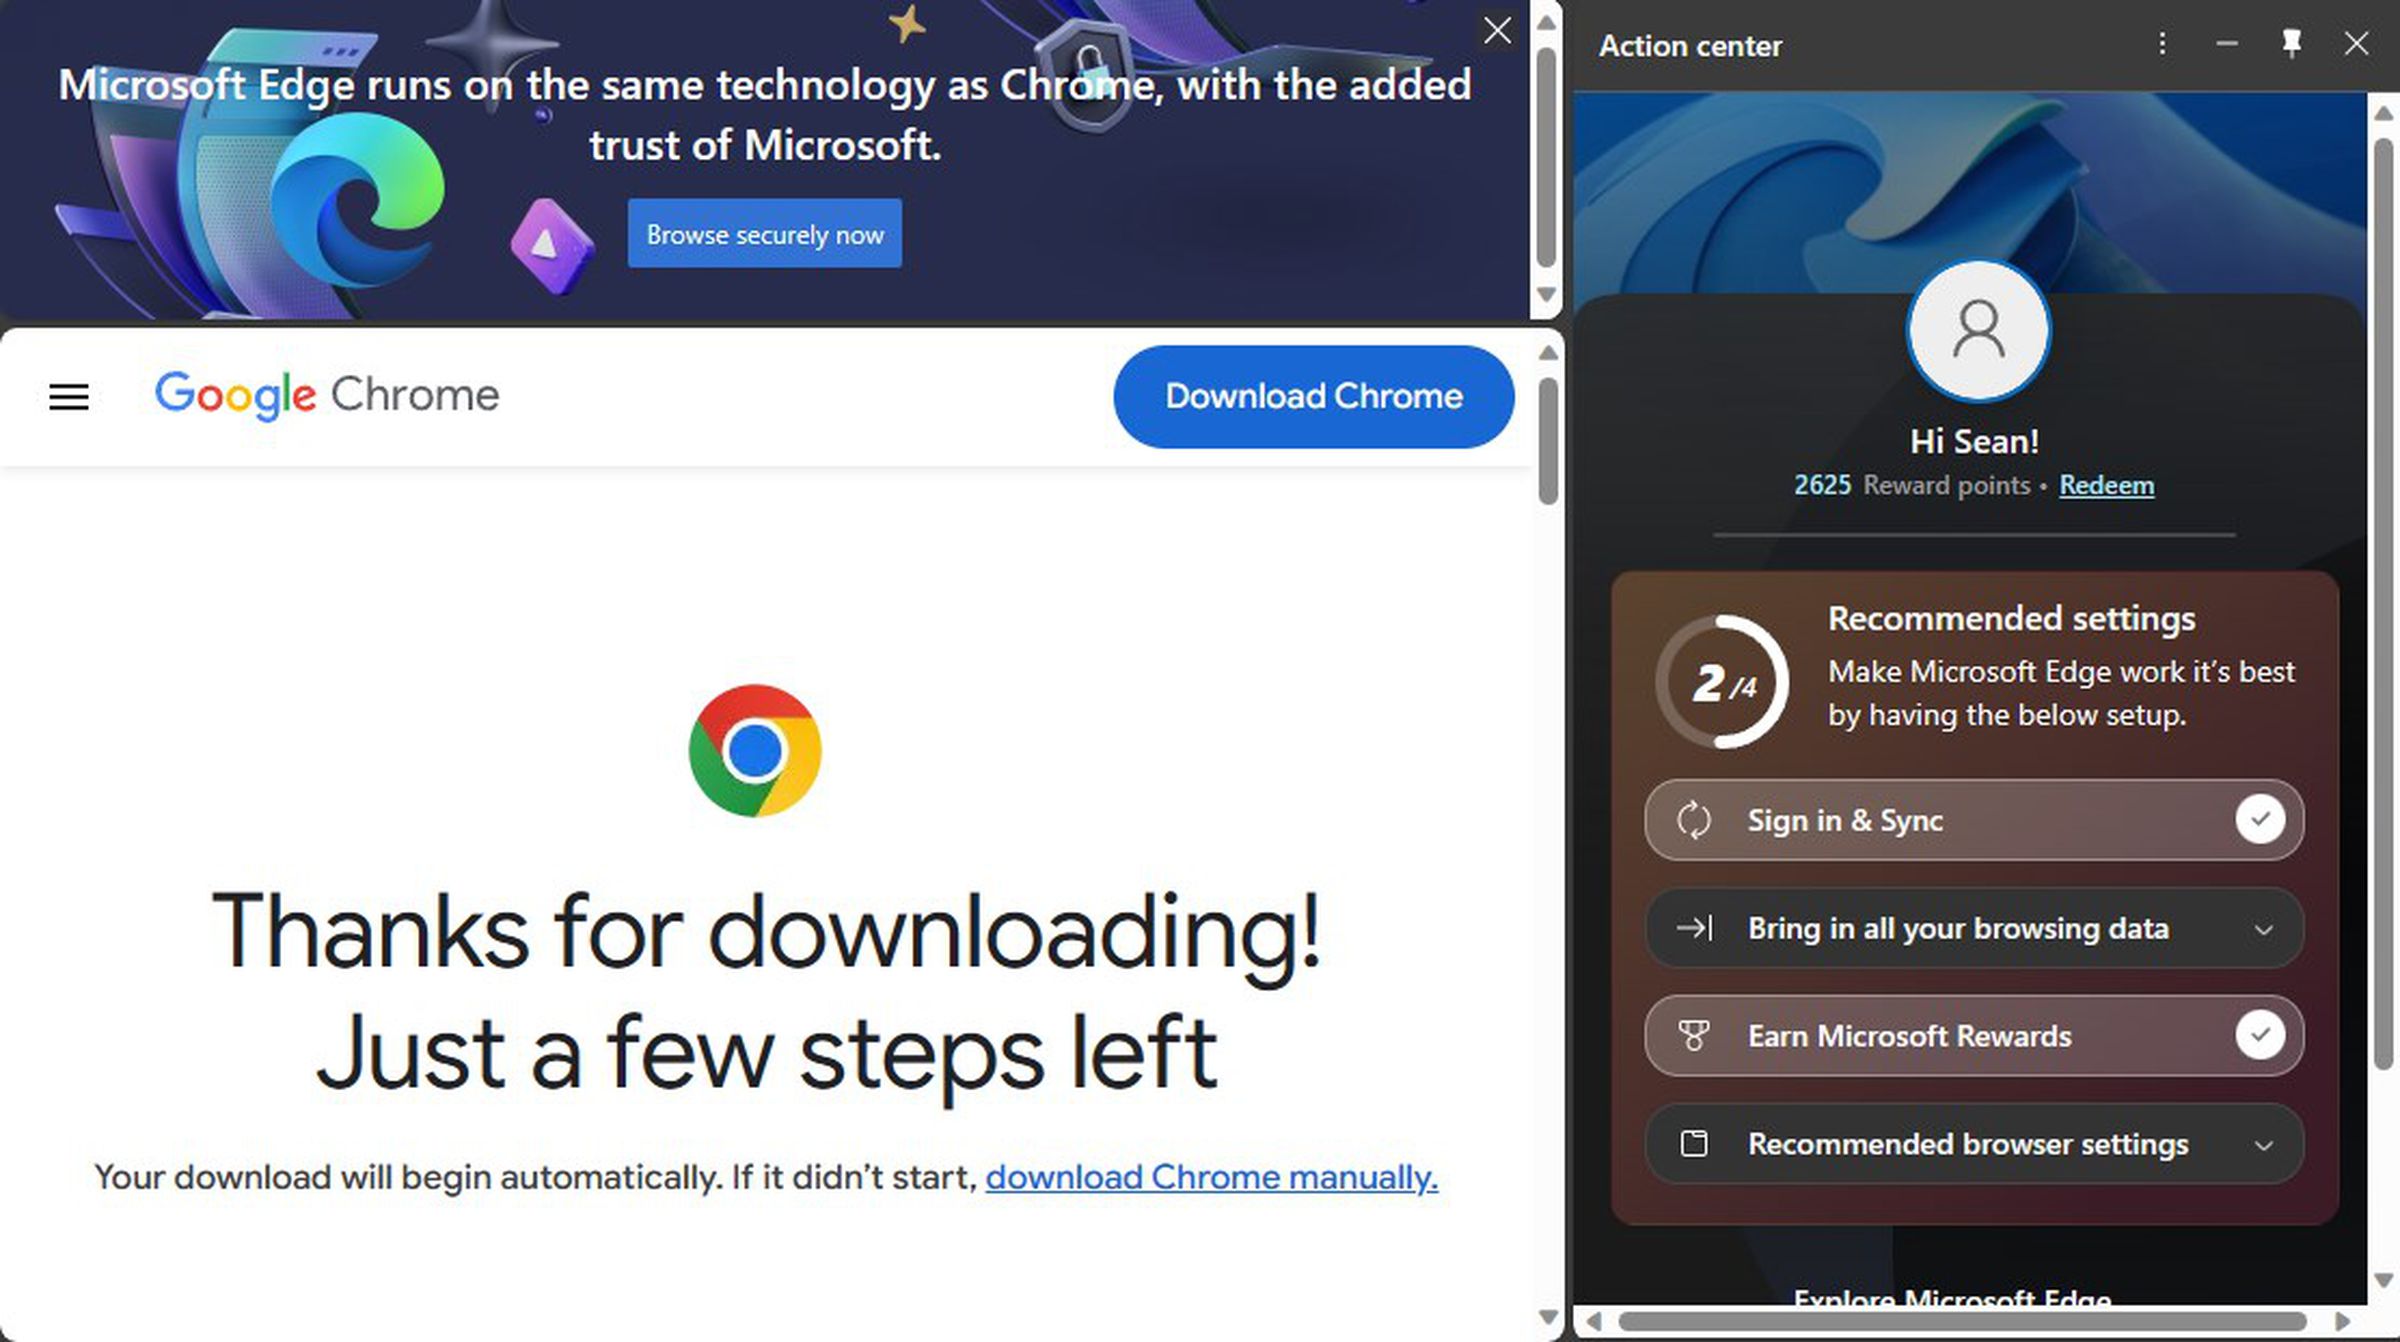 “Microsoft Edge runs on the same technology as Chrome, with the added trust of Microsoft,” reads an injected ad that appeared after my download.